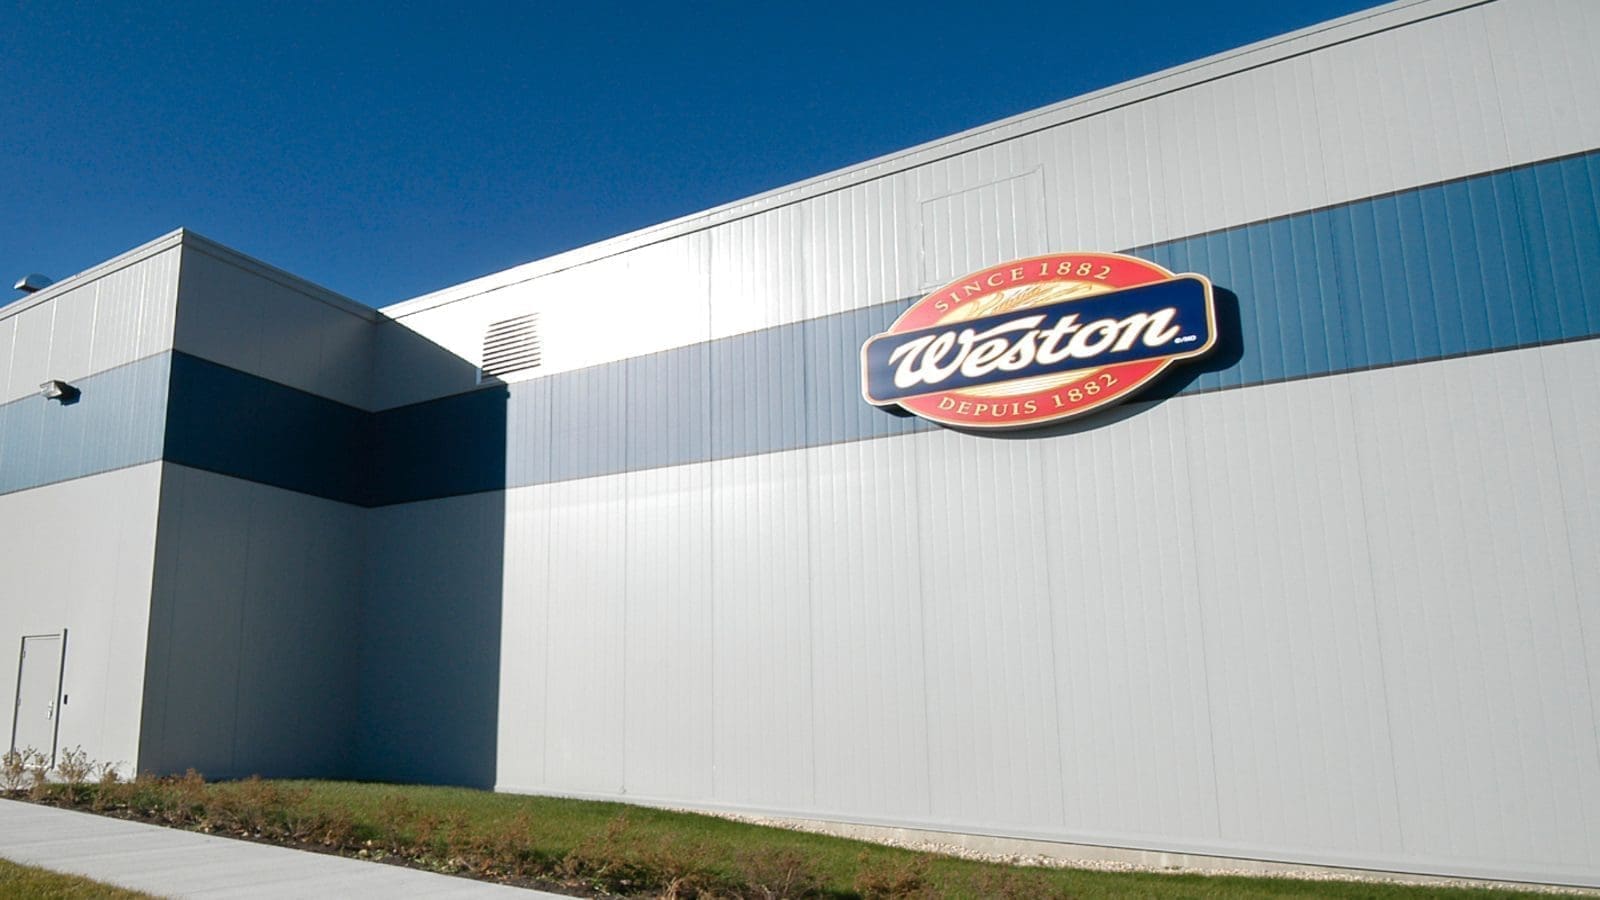 George Weston divests North America bakery business to FGF Brands for US$1.2 billion